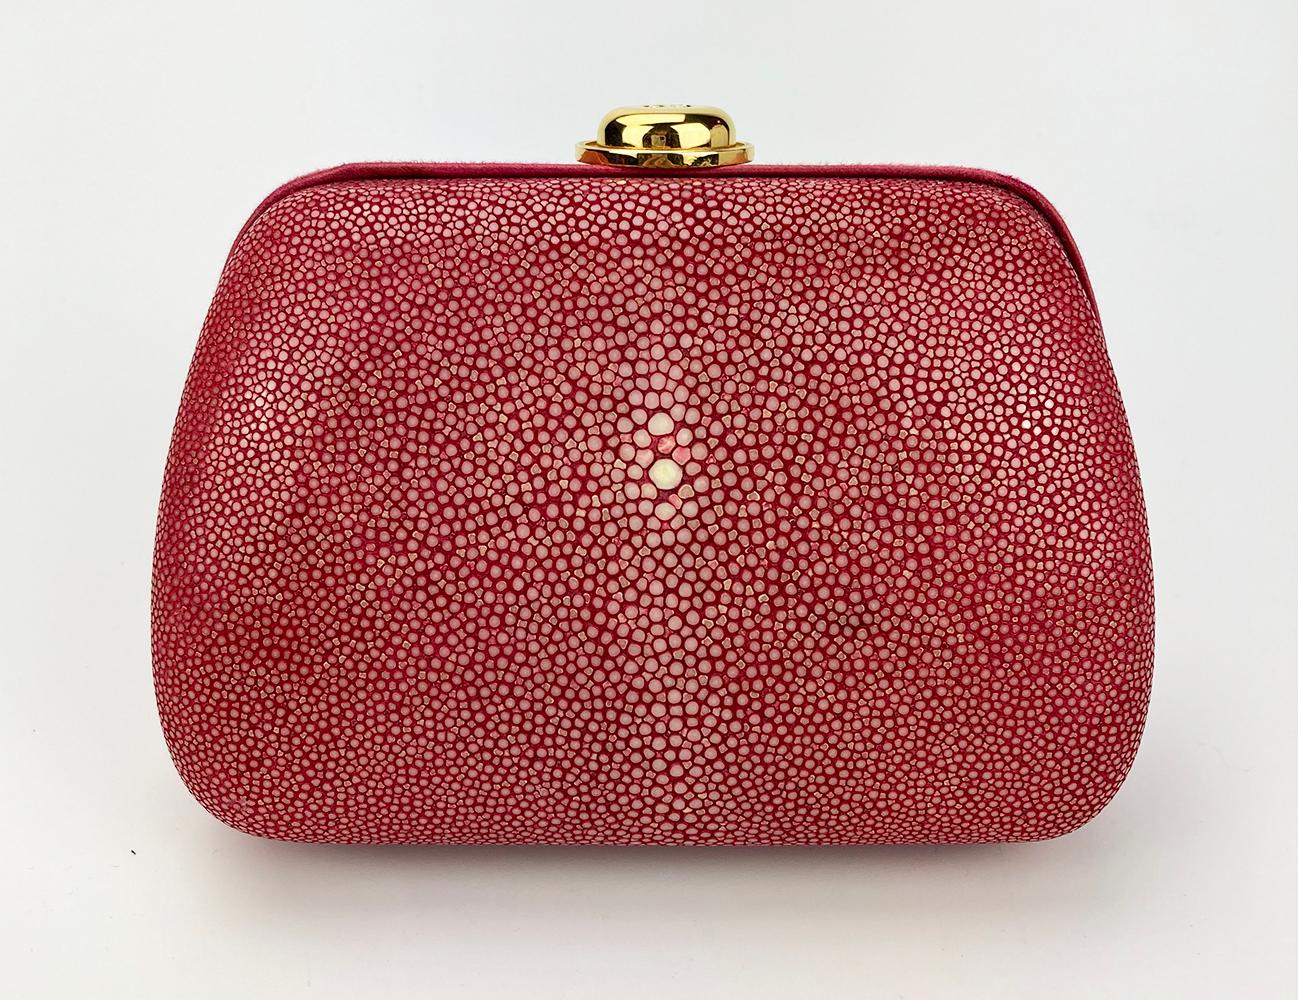 Christian Dior Pink Galuchat Stingray Clutch in good condition. Coral pink stingray exterior trimmed with dark pink satin edges and gold hardware. Top lift latch closure opens to a purple silk lined interior with an attached gold chain shoulder